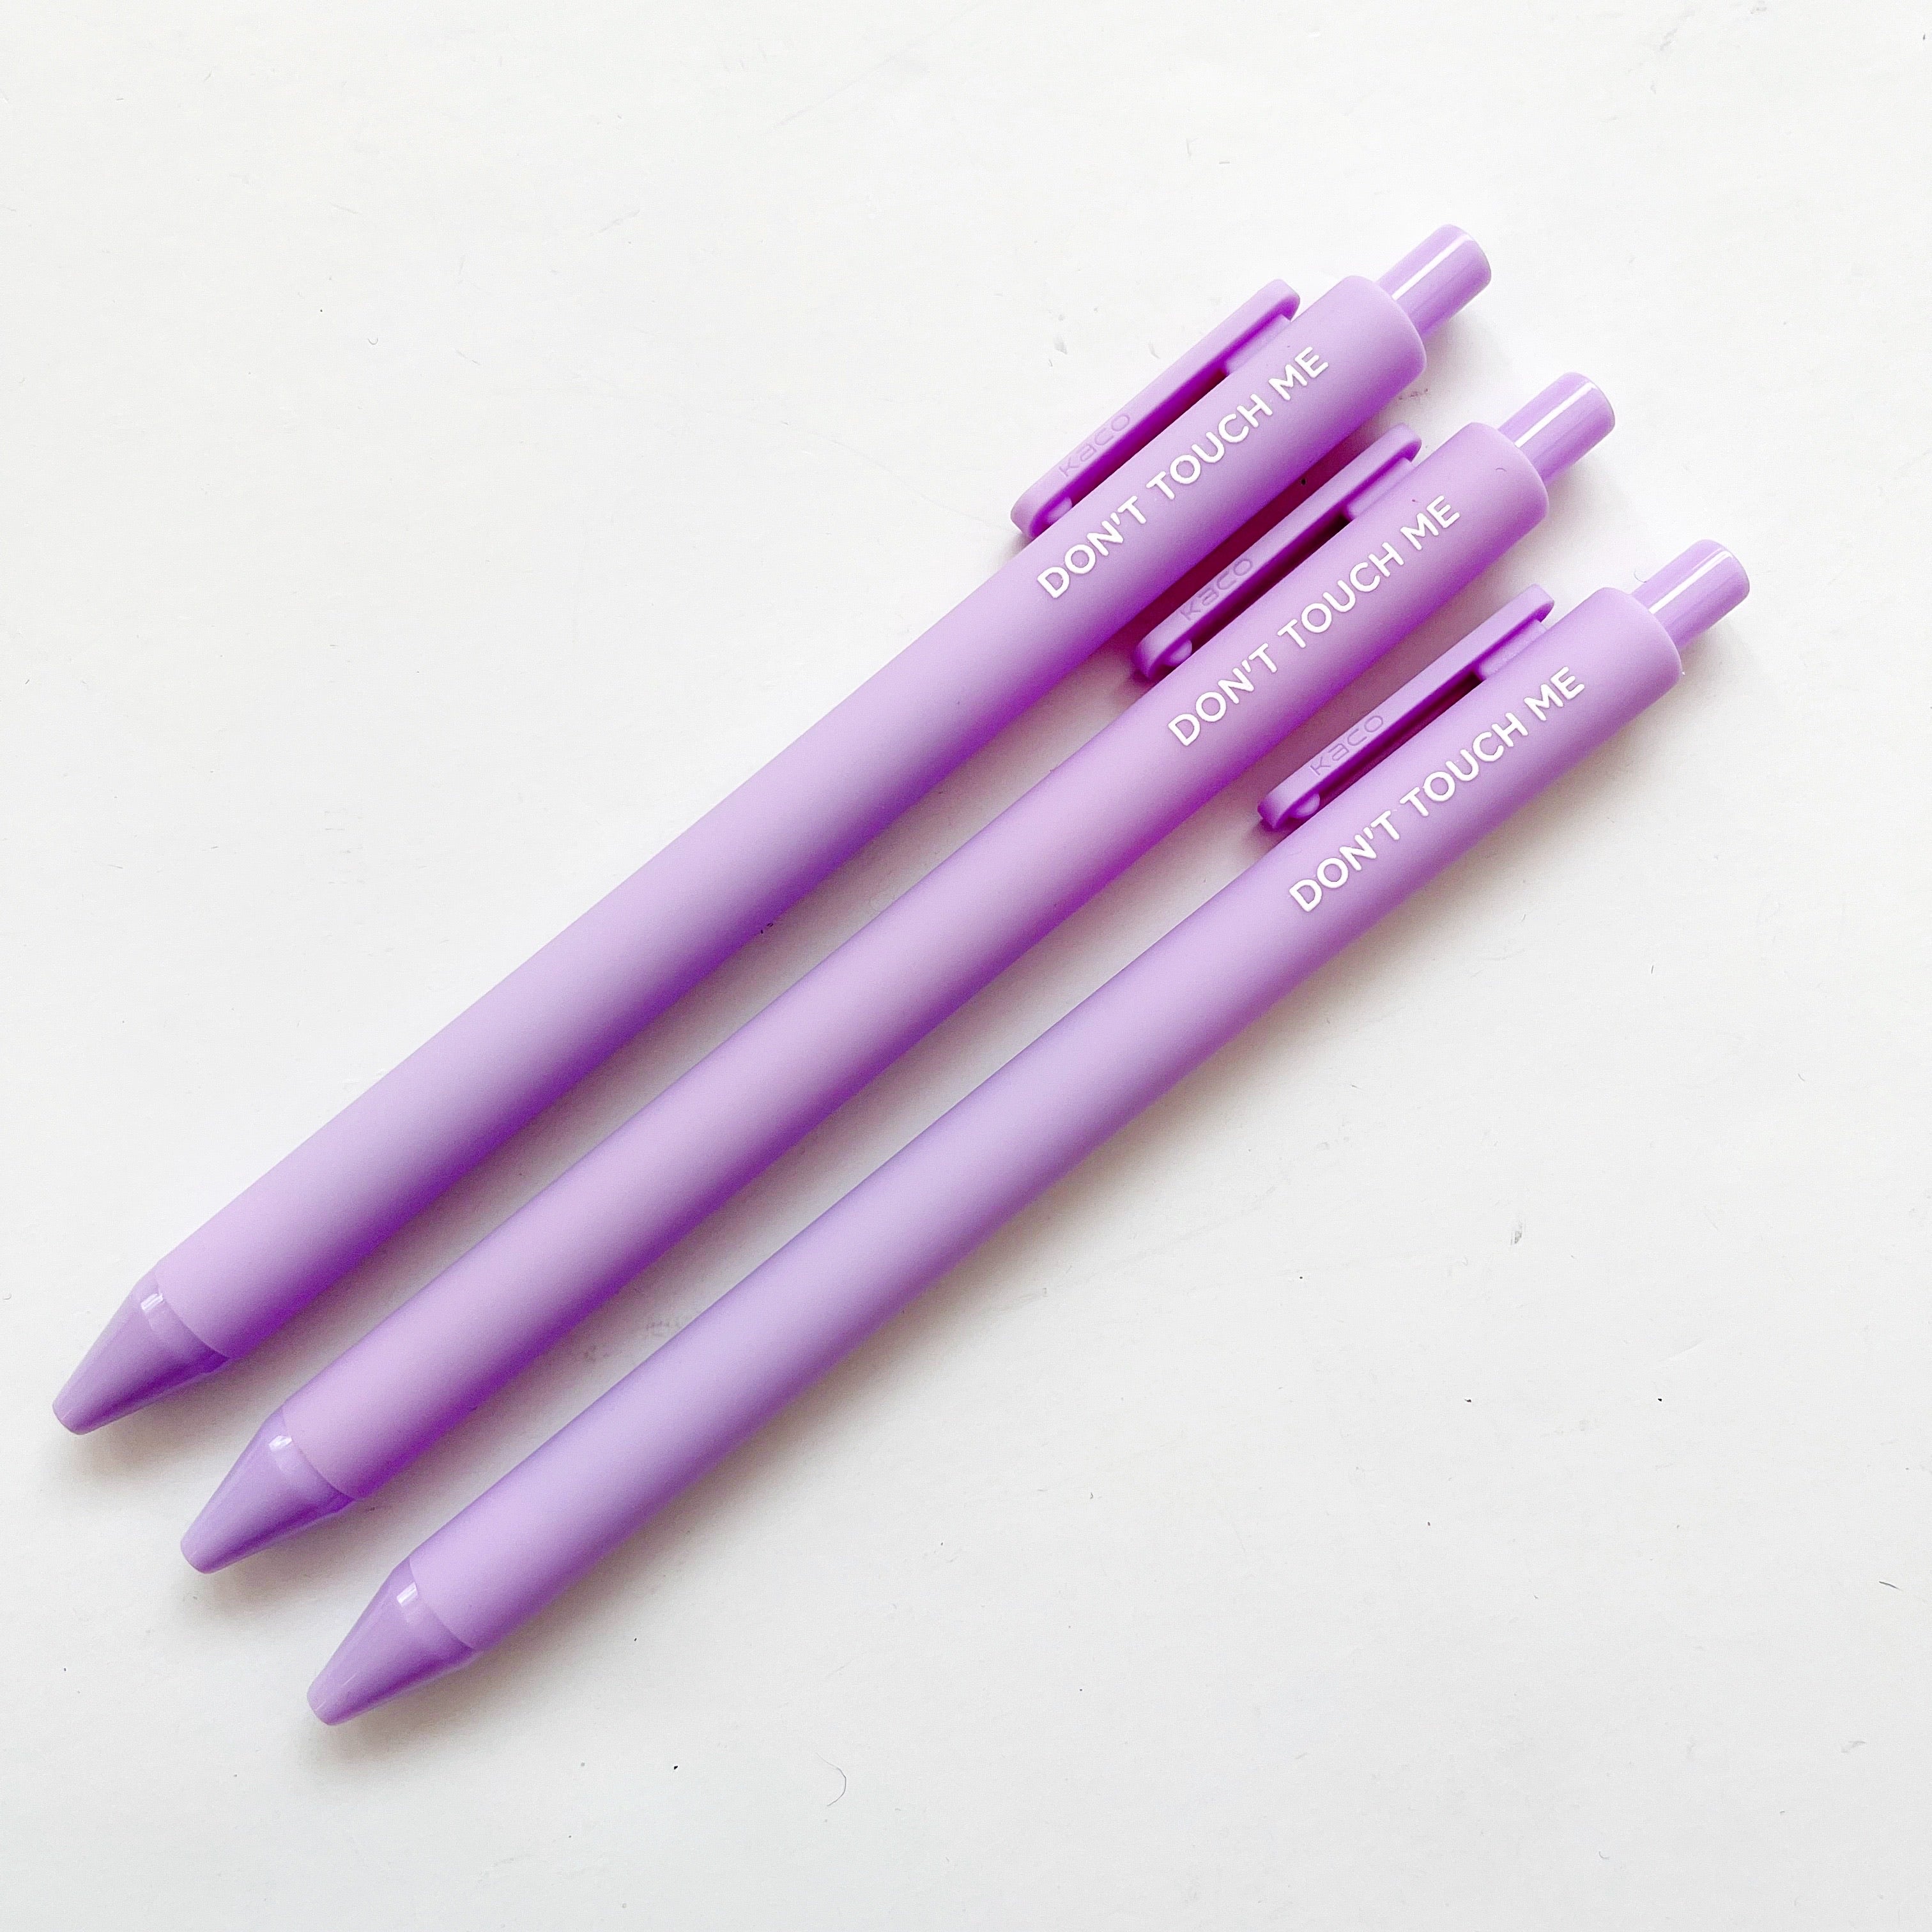 Lilac pens with white text says, "Don't touch me". 